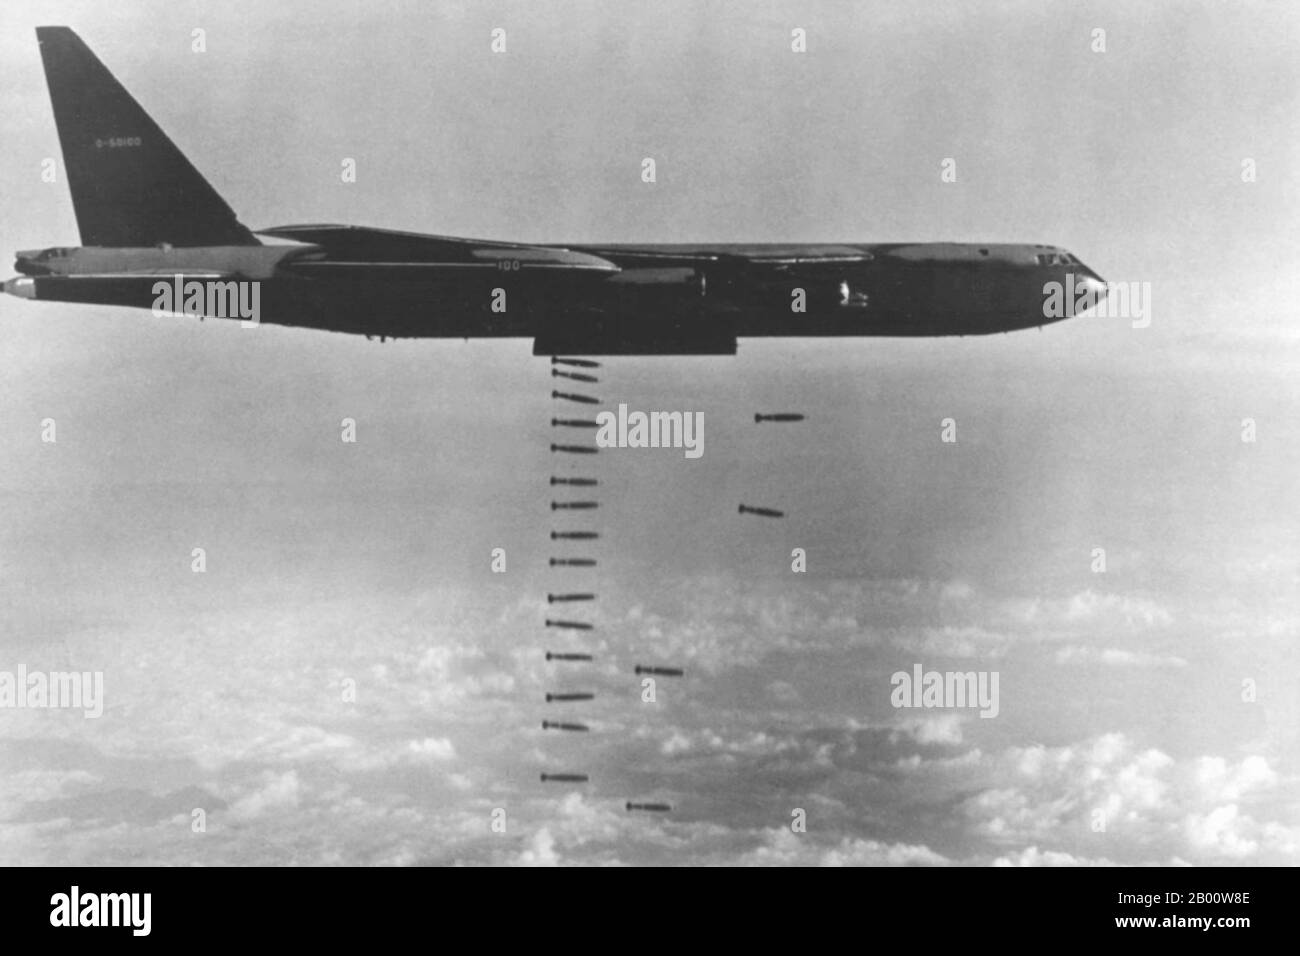 Vietnam: A USAF B-52D unleashes a rain of bombs siomewhere over Vietnam, c.1972.  USAF B-52s flying out of Guam and various air bases in Thailand did tremendous damage in terms of infrastructure and human life, especially during Arclight strikes over South Vietnam and during the Christmas Offensive against Hanoi in 1972.  The Second Indochina War, known in America as the Vietnam War, was a Cold War era military conflict that occurred in Vietnam, Laos, and Cambodia from 1 November 1955 to the fall of Saigon on 30 April 1975. Stock Photo